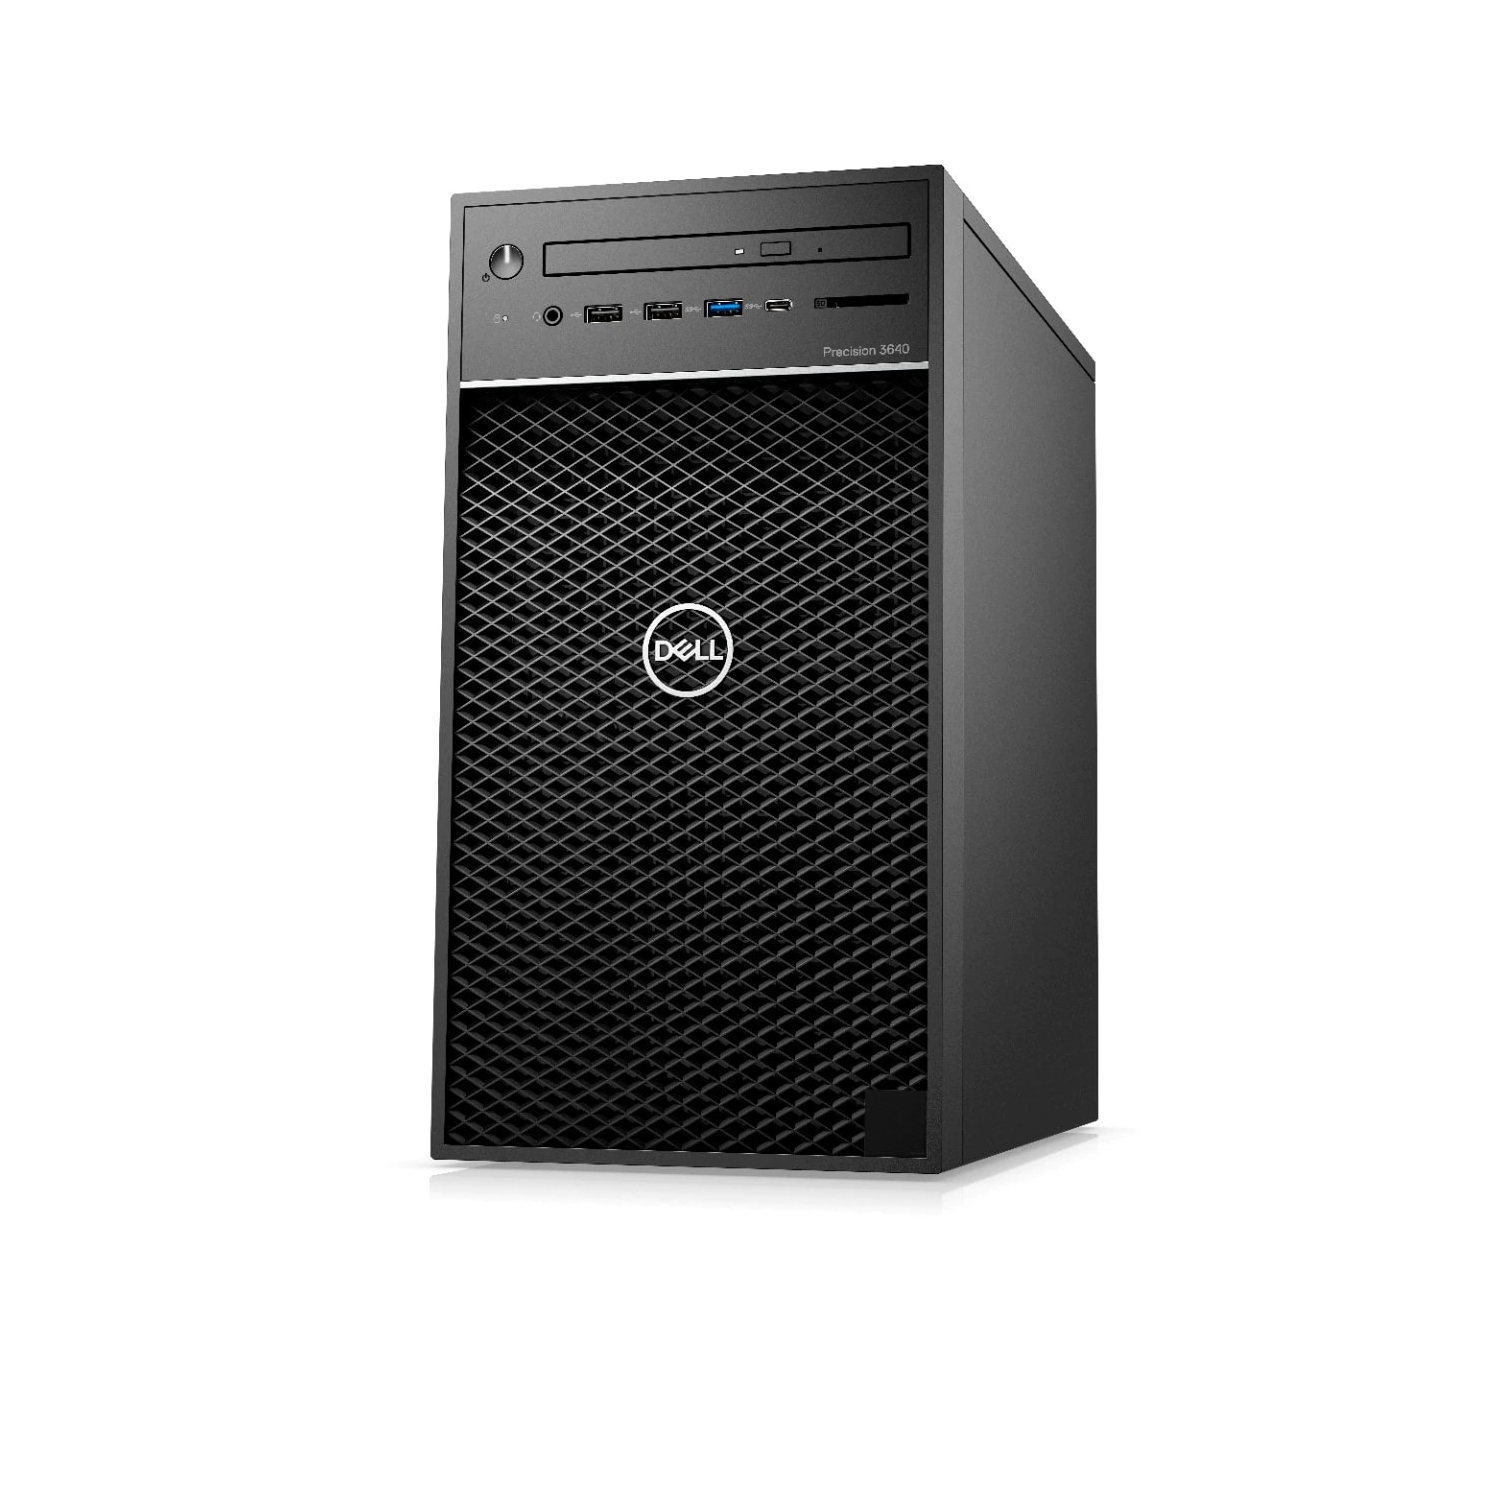 Refurbished (Excellent) - Dell Precision T3640 Workstation Desktop (2018), Core i9, 1TB SSD, 64GB RAM, RTX 3090, 10 Cores @ 5.3 GHz, 10th Gen CPU Certified Refurbished